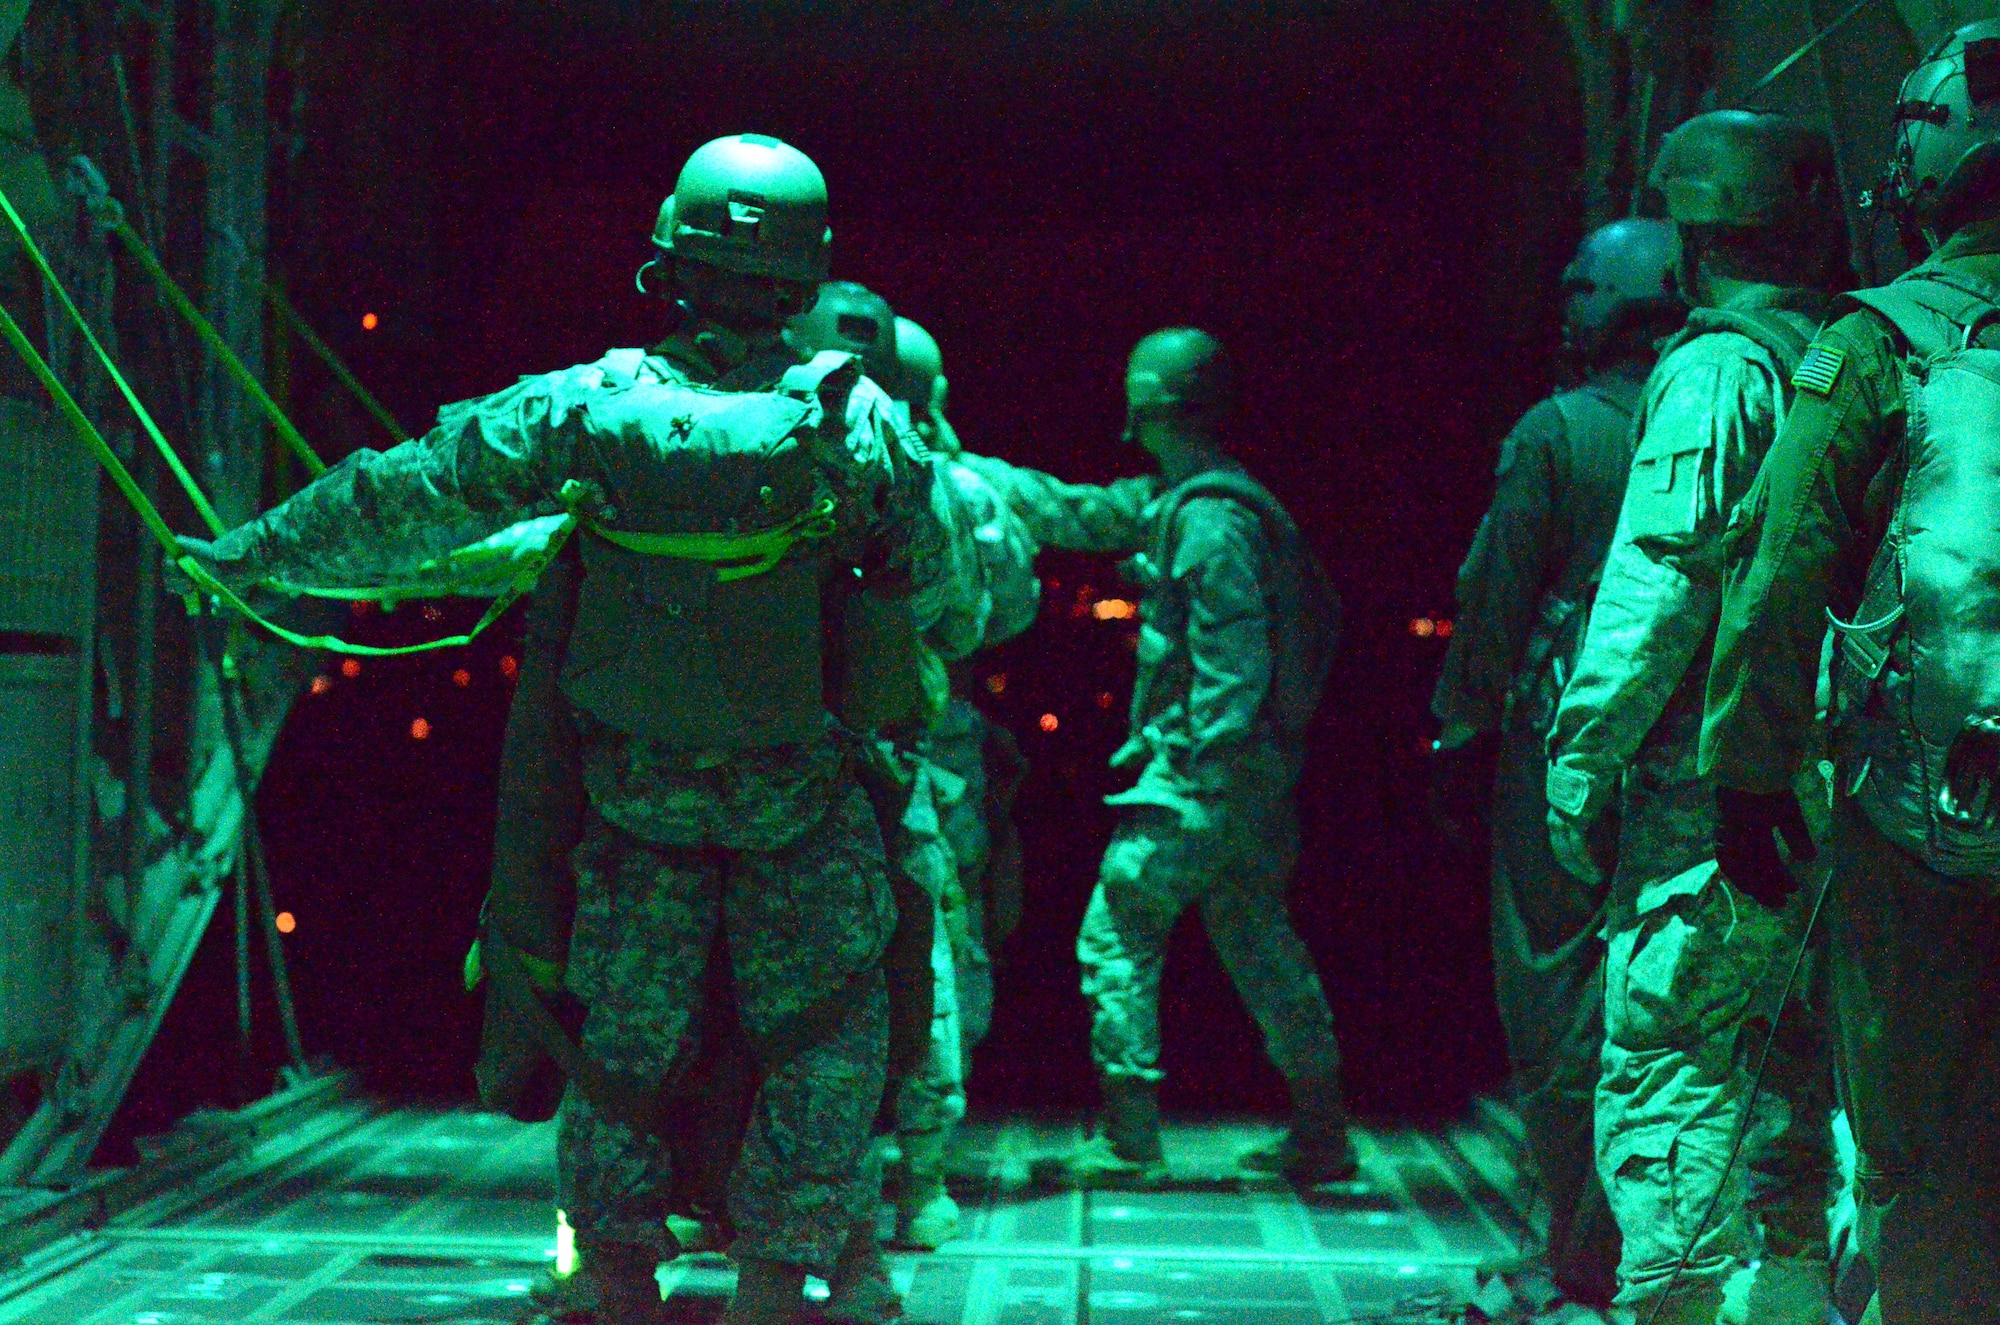 The 160th Special Operations Aviation Regiment paratroopers prepare to jump out of an 815th Airlift Squadron C-130J  Super Hercules to establish a forward arming and refueling point in support of the Operation Southern Strike exercise Oct. 29, 2014, in Miss. The 160th SOAR is headquartered in Fort Campbell, Ky. The 815th AS is an Air Force Reserve unit stationed at Keesler Air Force Base, Miss. (U.S. Air Force photo/Master Sgt. Brian Lamar) 